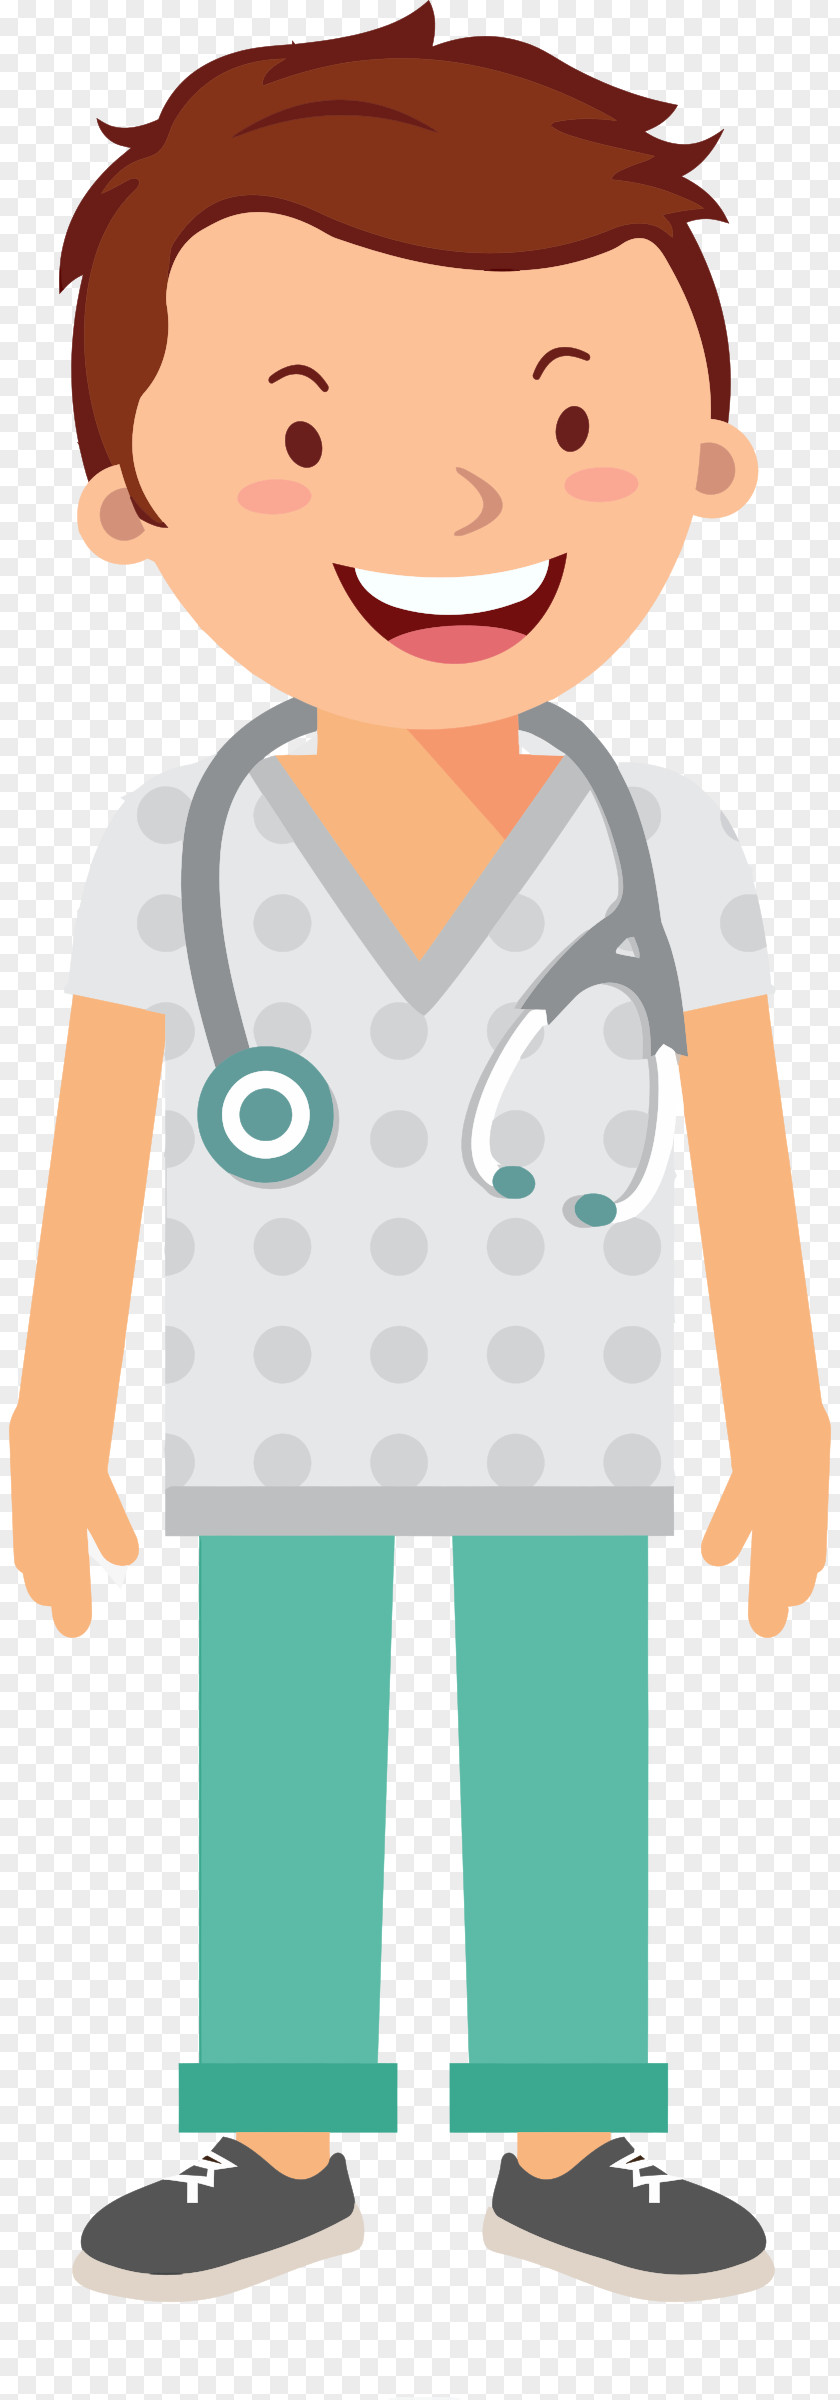 Doctor Of Medicine Symbol Clip Art Physician Openclipart PNG